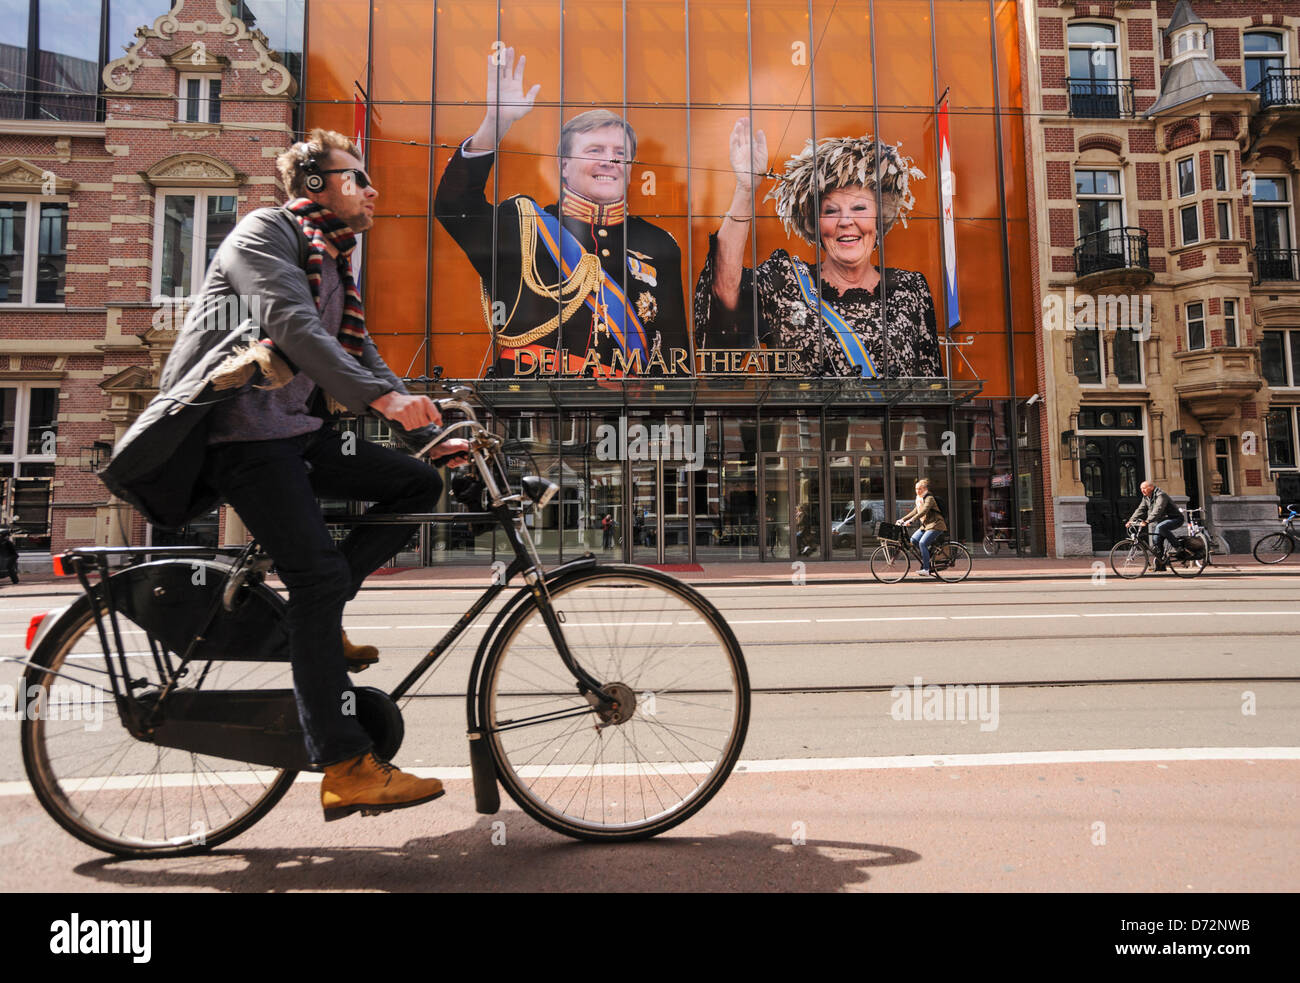 Netherlands, Amsterdam, 27 April 2013.A cyclist passes by portraits of Queen Beatrix of the Netherlands and her son, Crown Prince Willem-Alexander, displayed in front of a theatre in Amsterdam April 27, 2013. Amsterdam, the capital of the Netherlands is preparing for Queen's Day on April 30, which will also mark the abdication of Queen Beatrix and the investiture of her eldest son Willem-Alexander. Alamy Live News Stock Photo